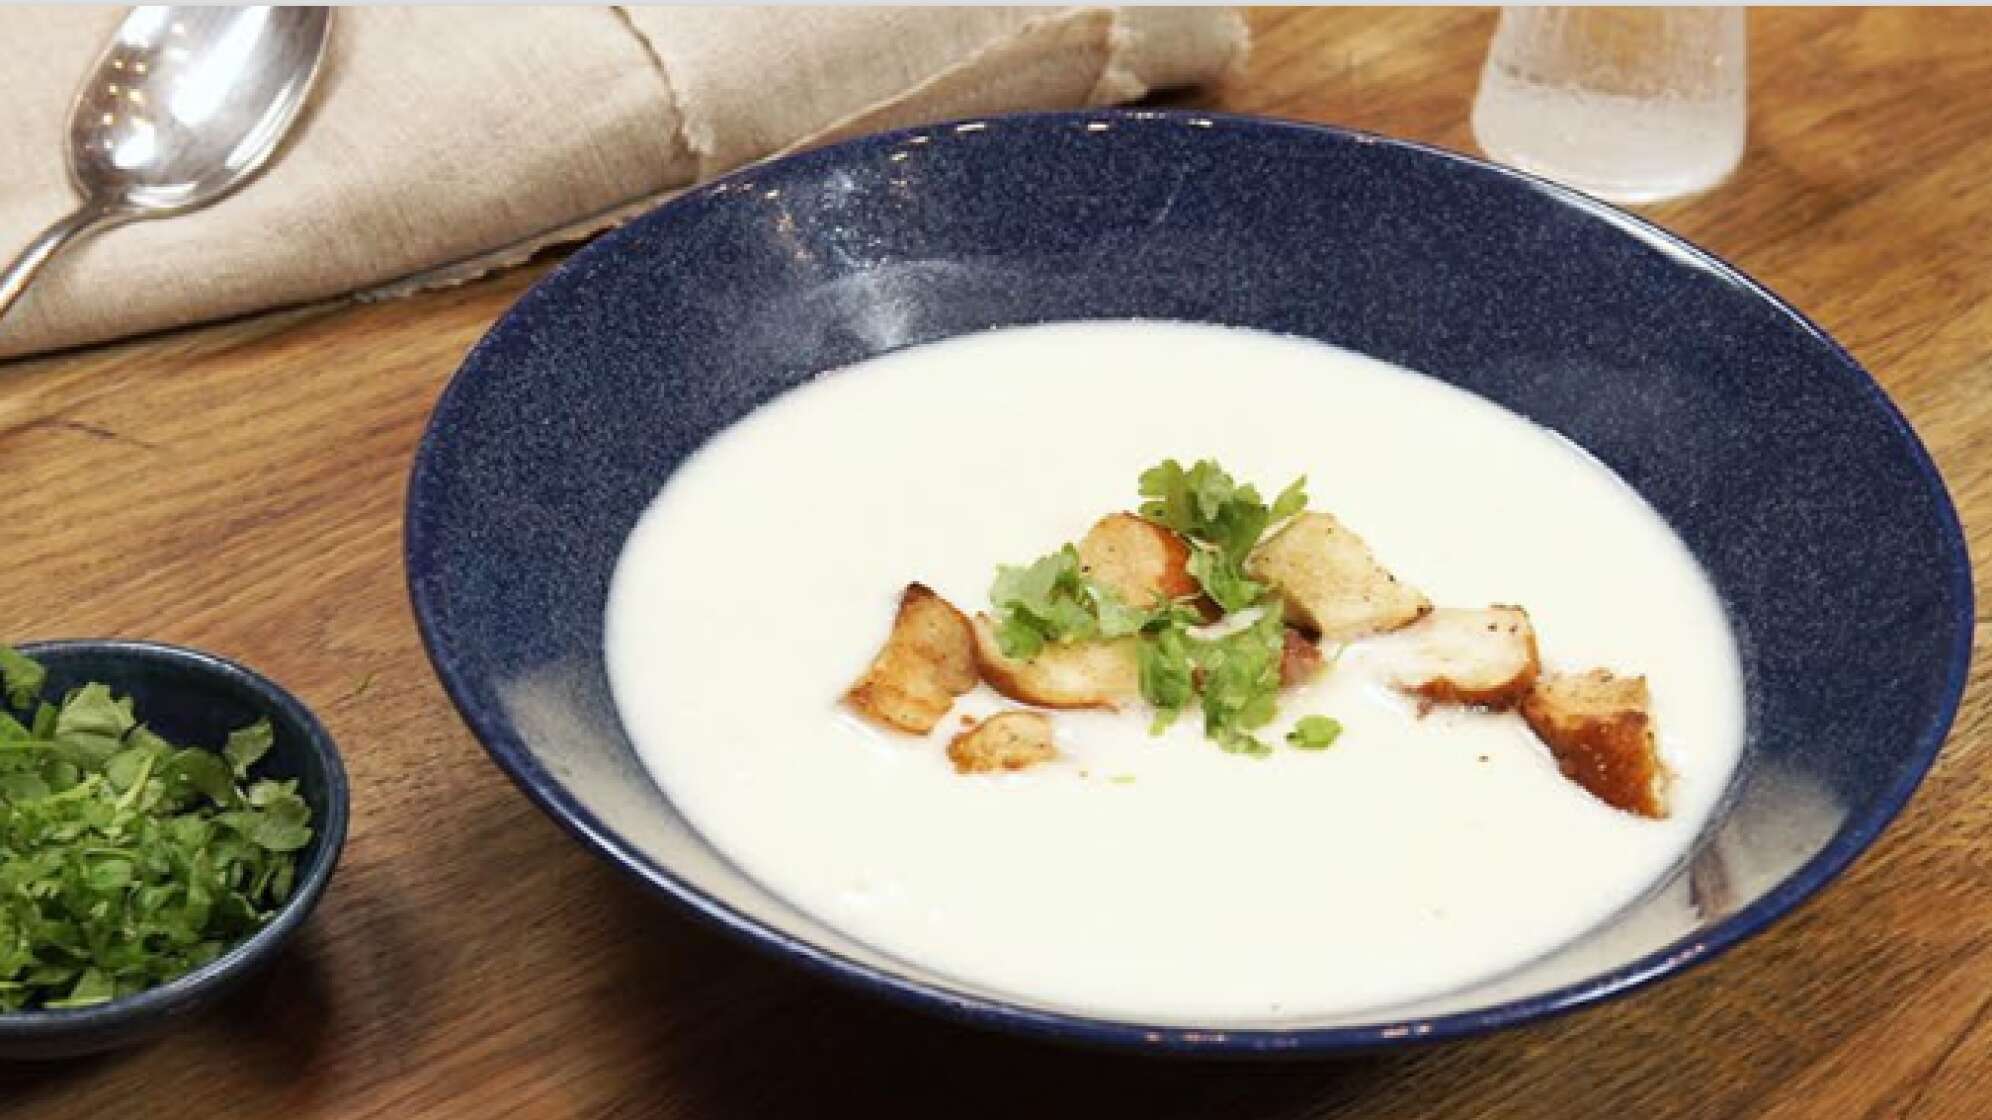 Spargelsuppe mit Brezn-Croutons